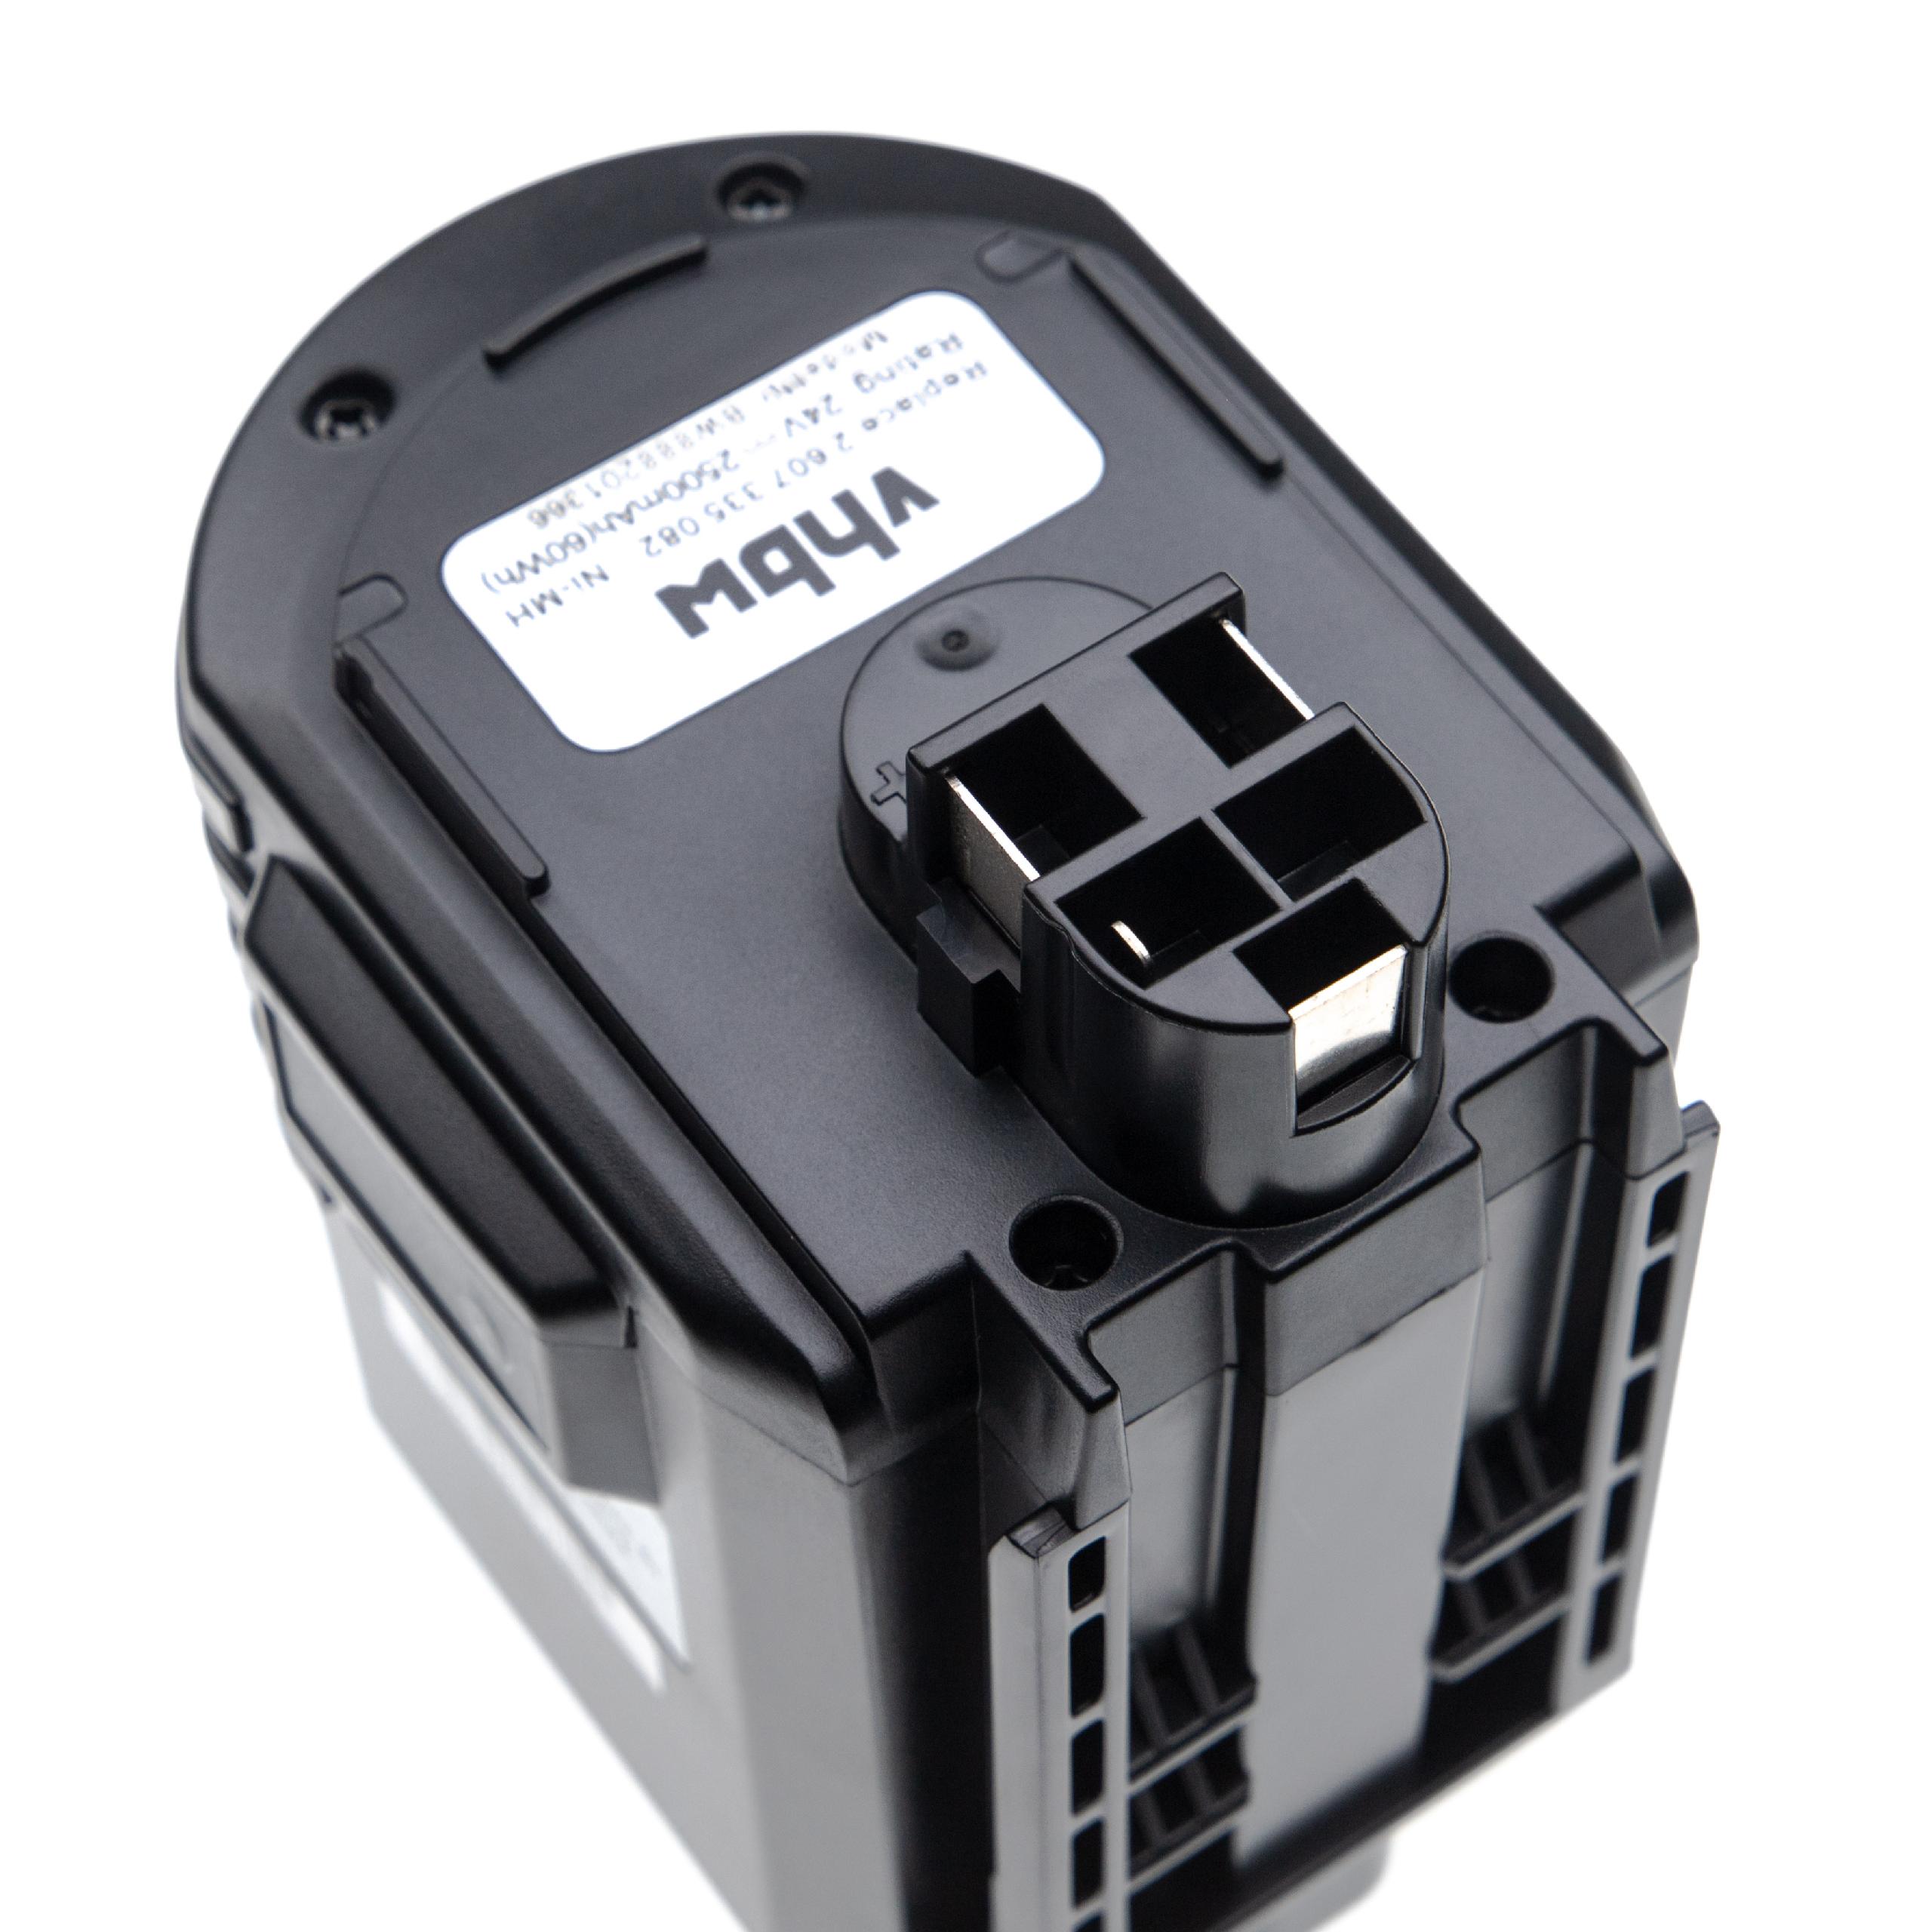 Electric Power Tool Battery Replaces Bosch 2 607 335 082, 1617334082, 2607335082 - 2500 mAh, 24 V, NiMH